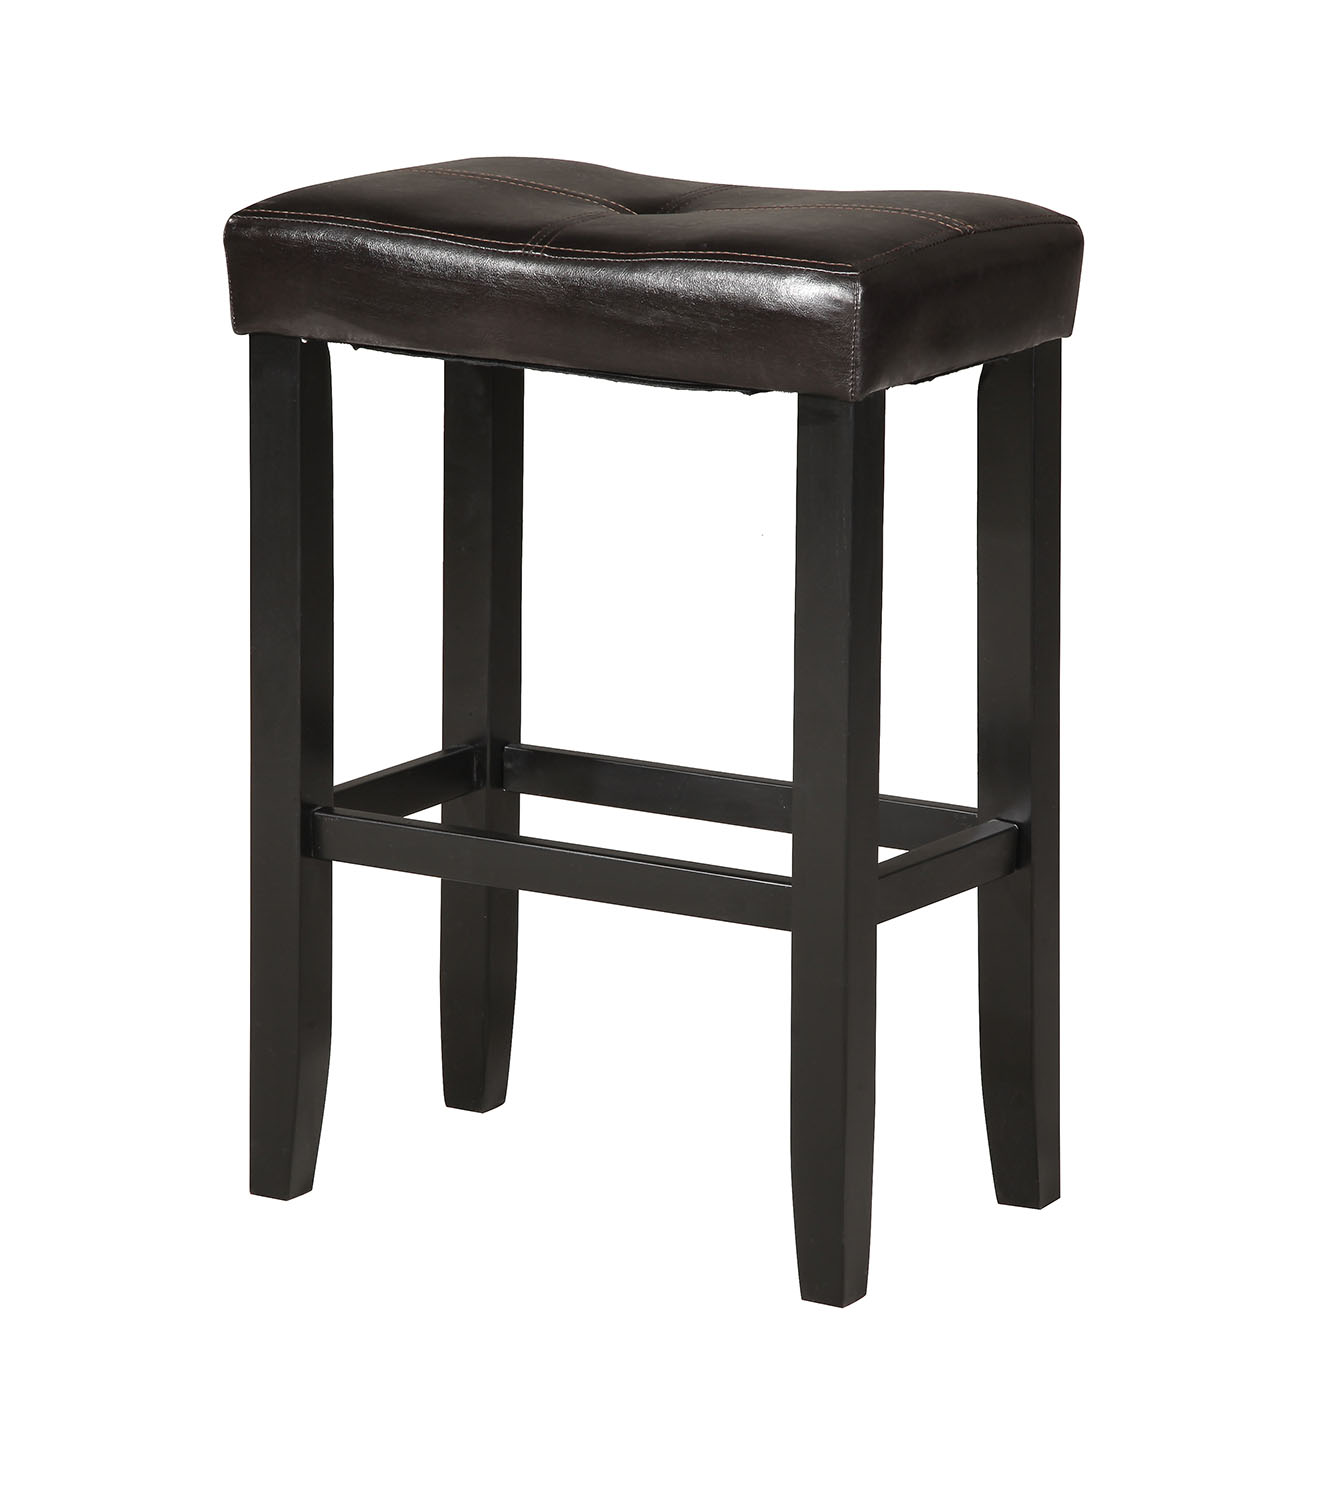 21" X 14" X 24" 2pc Espresso And Black Swivel Counter Height Stool